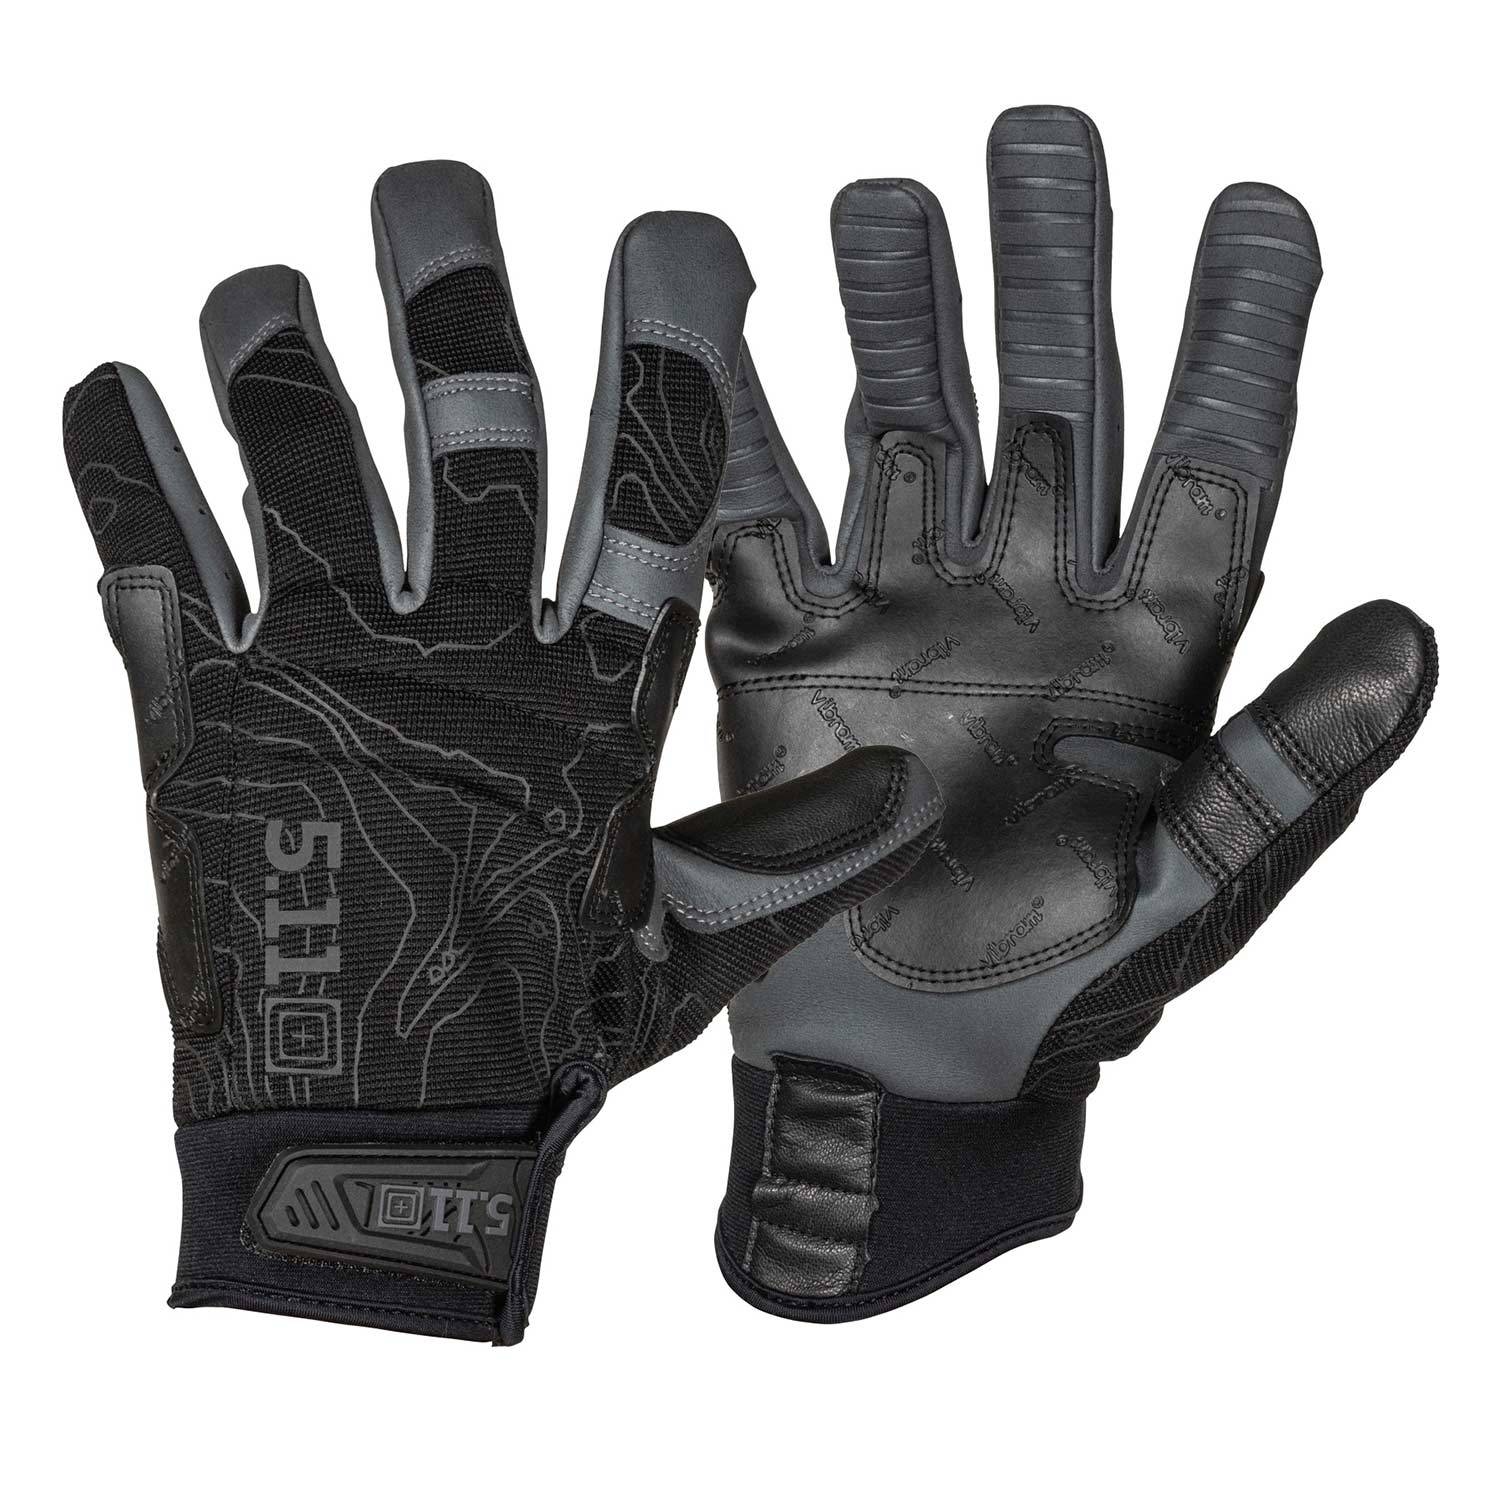 5.11 Tac Gloves Top Sellers, UP TO 67% OFF | www 